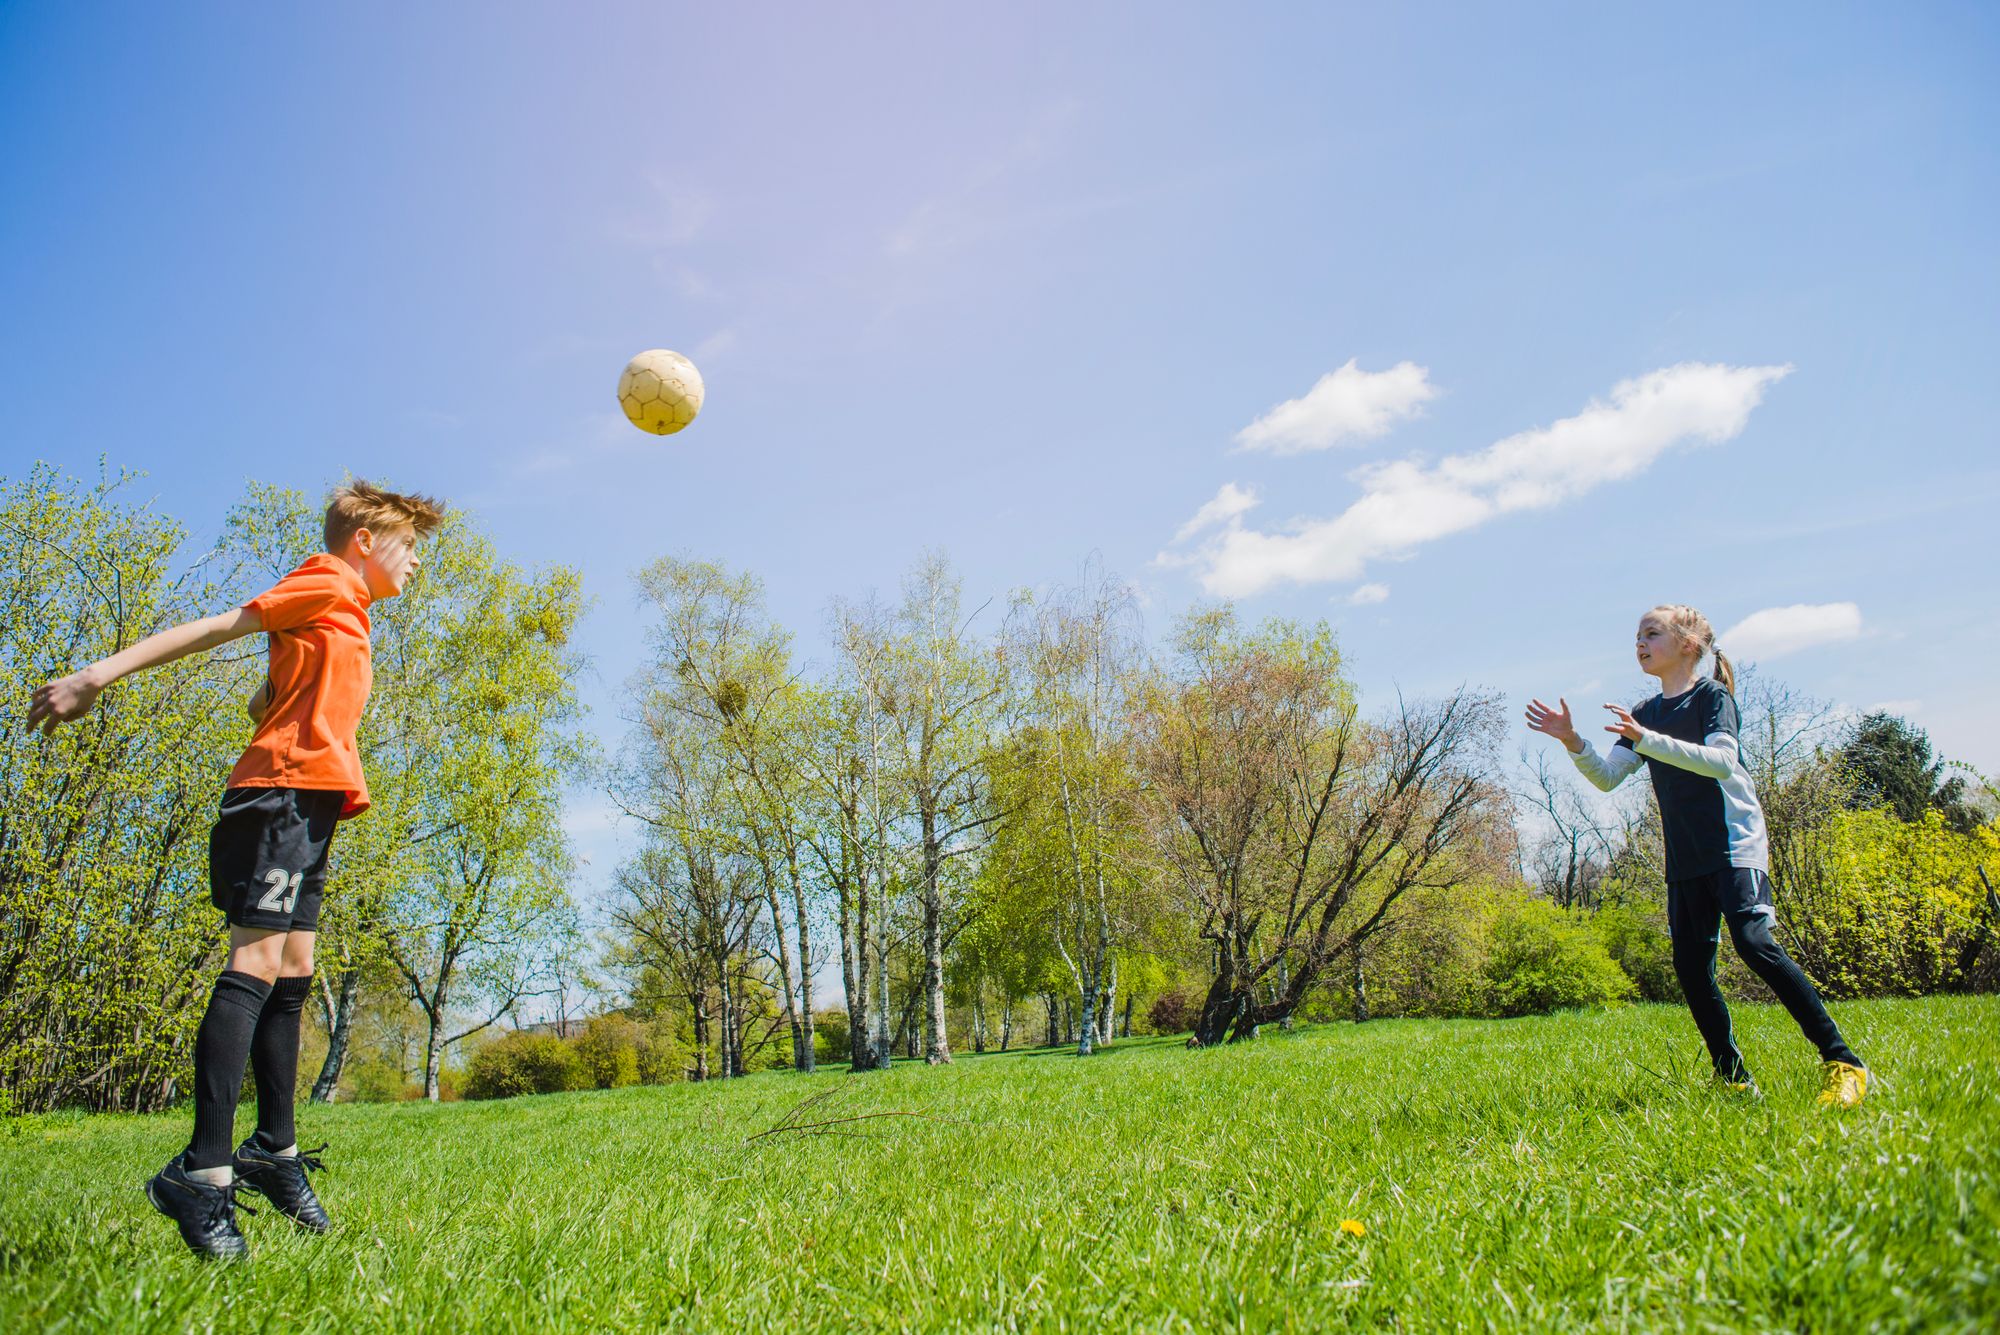   “Two kids playing soccer in the park”,  Image by "FreePik"